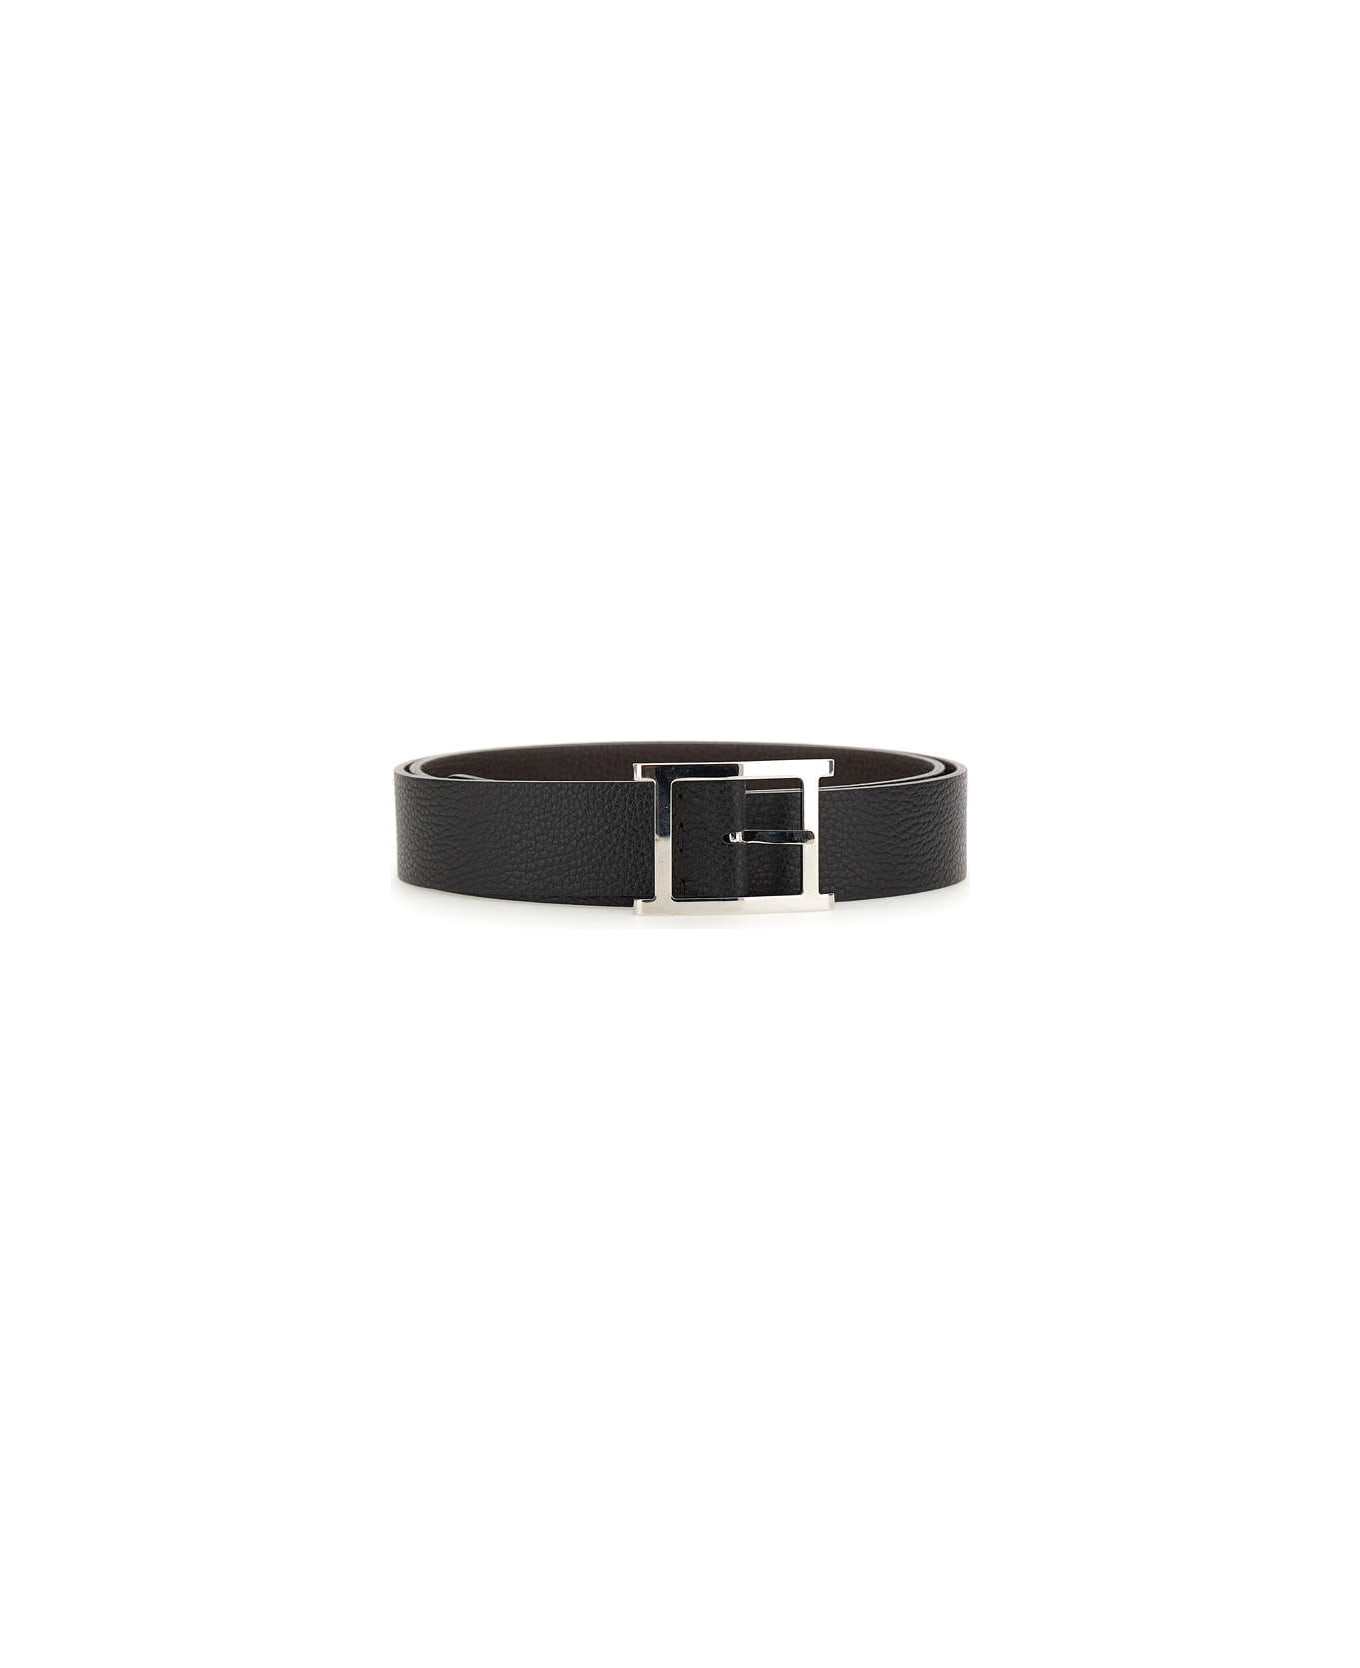 Orciani "micron Double" Belt - BLACK/BROWN